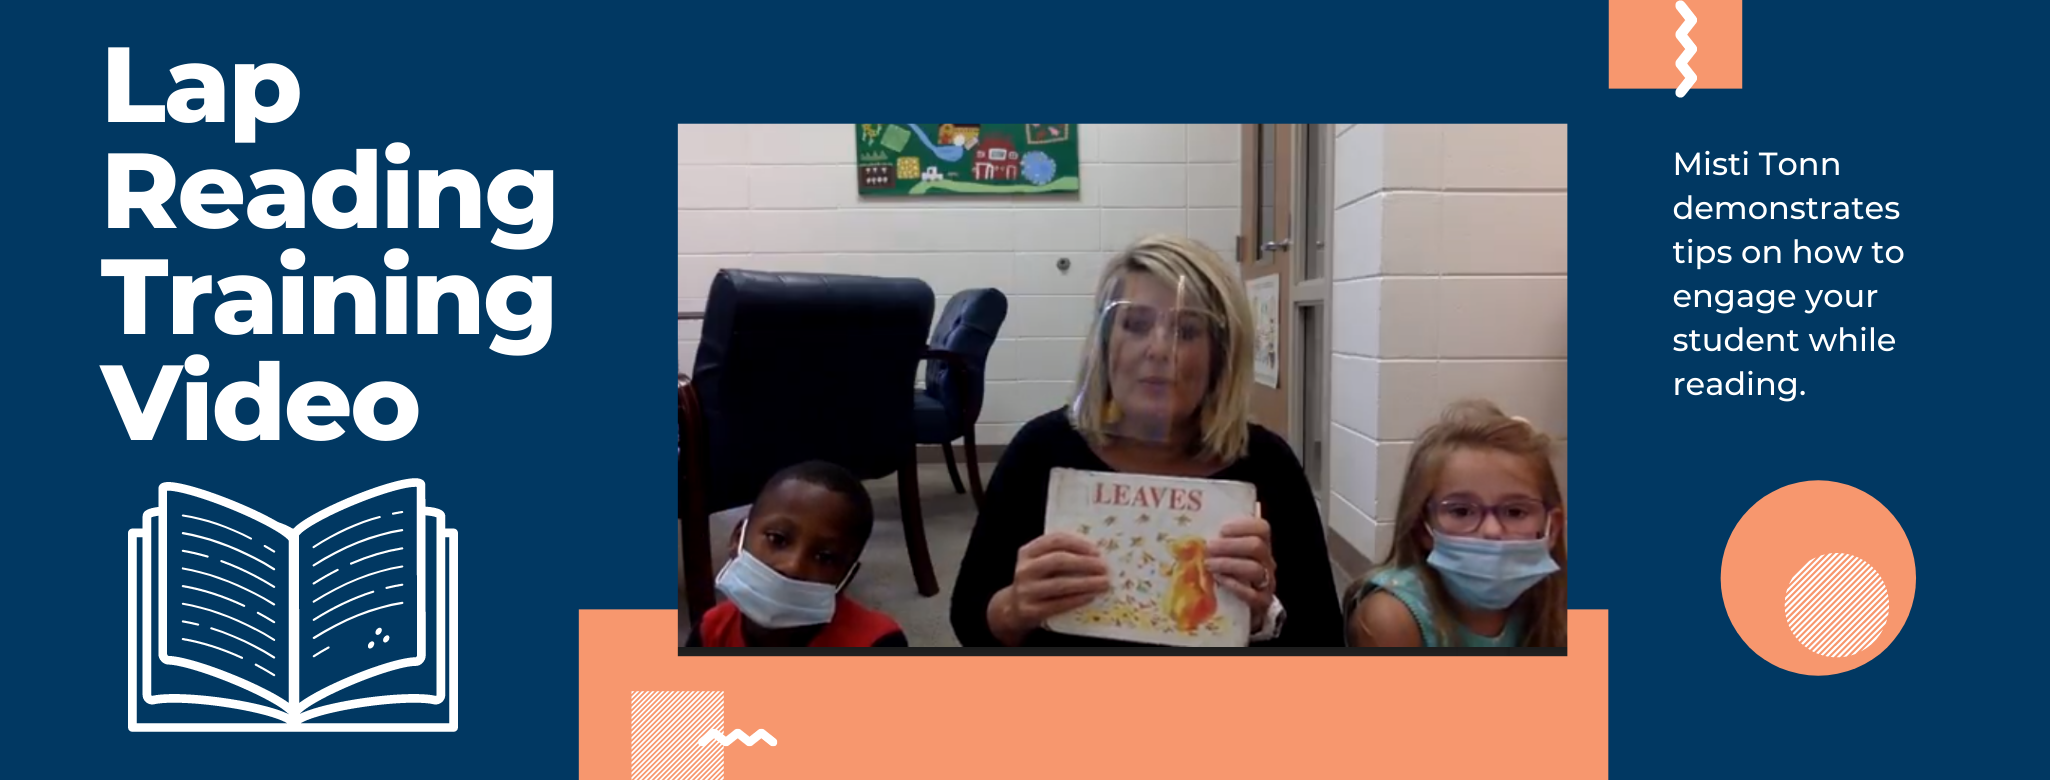 lap reading training video, misti tonn demonstrates on how to engage your student while reading and a picture of misti reading to two students in a classroom